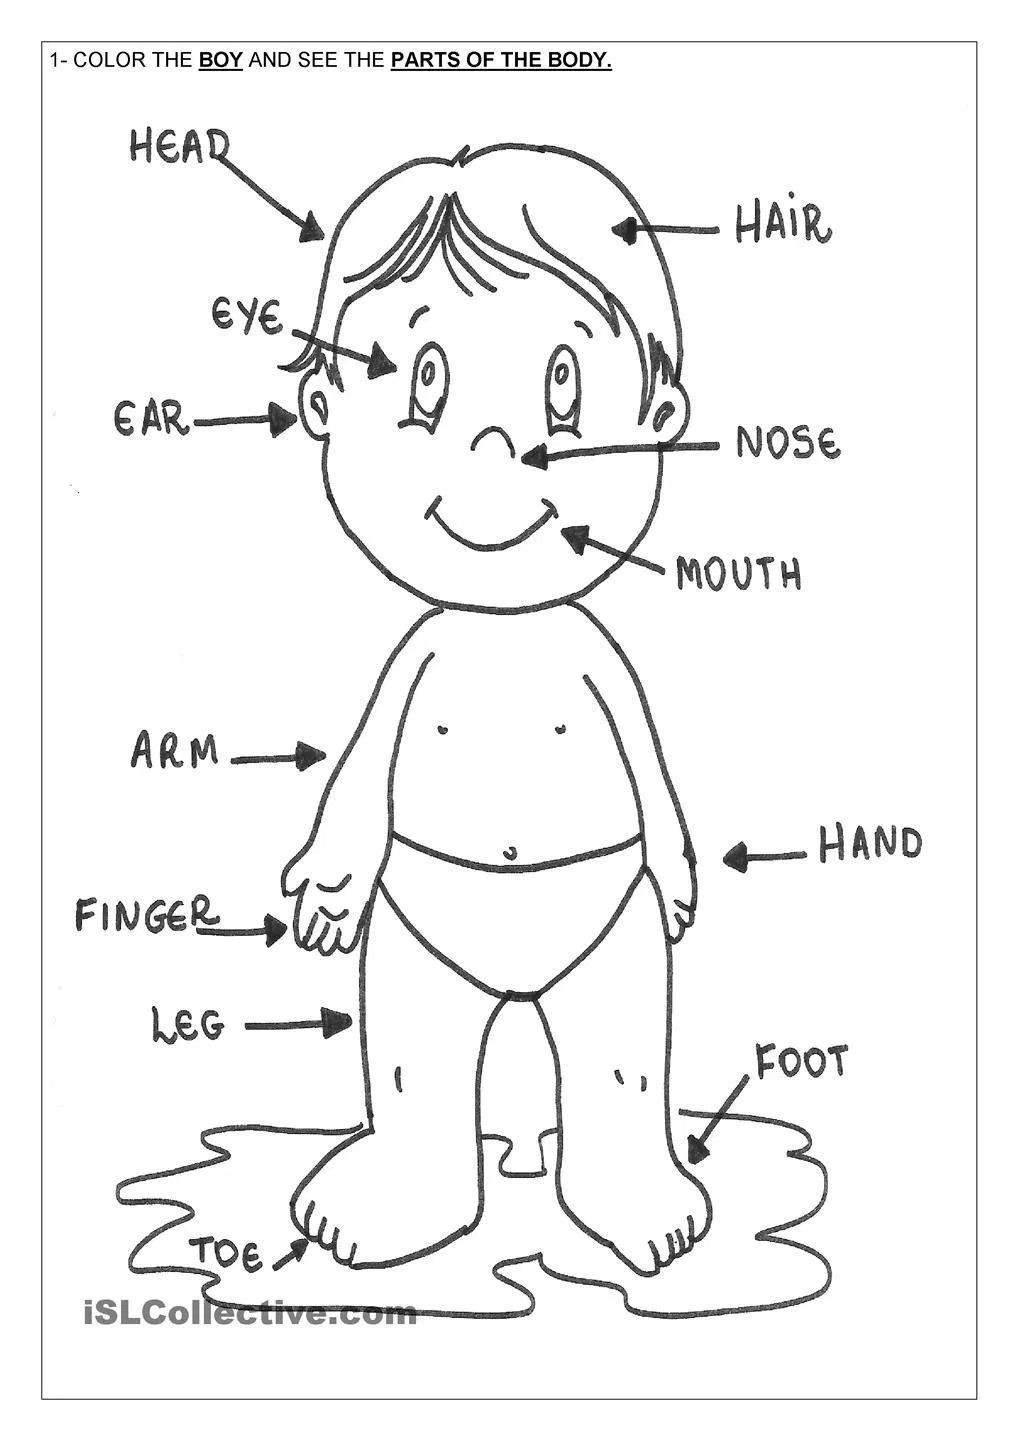 Body Parts Coloring Pages For Toddlers
 Printable Human Body Coloring Page Home In Pages For Kids